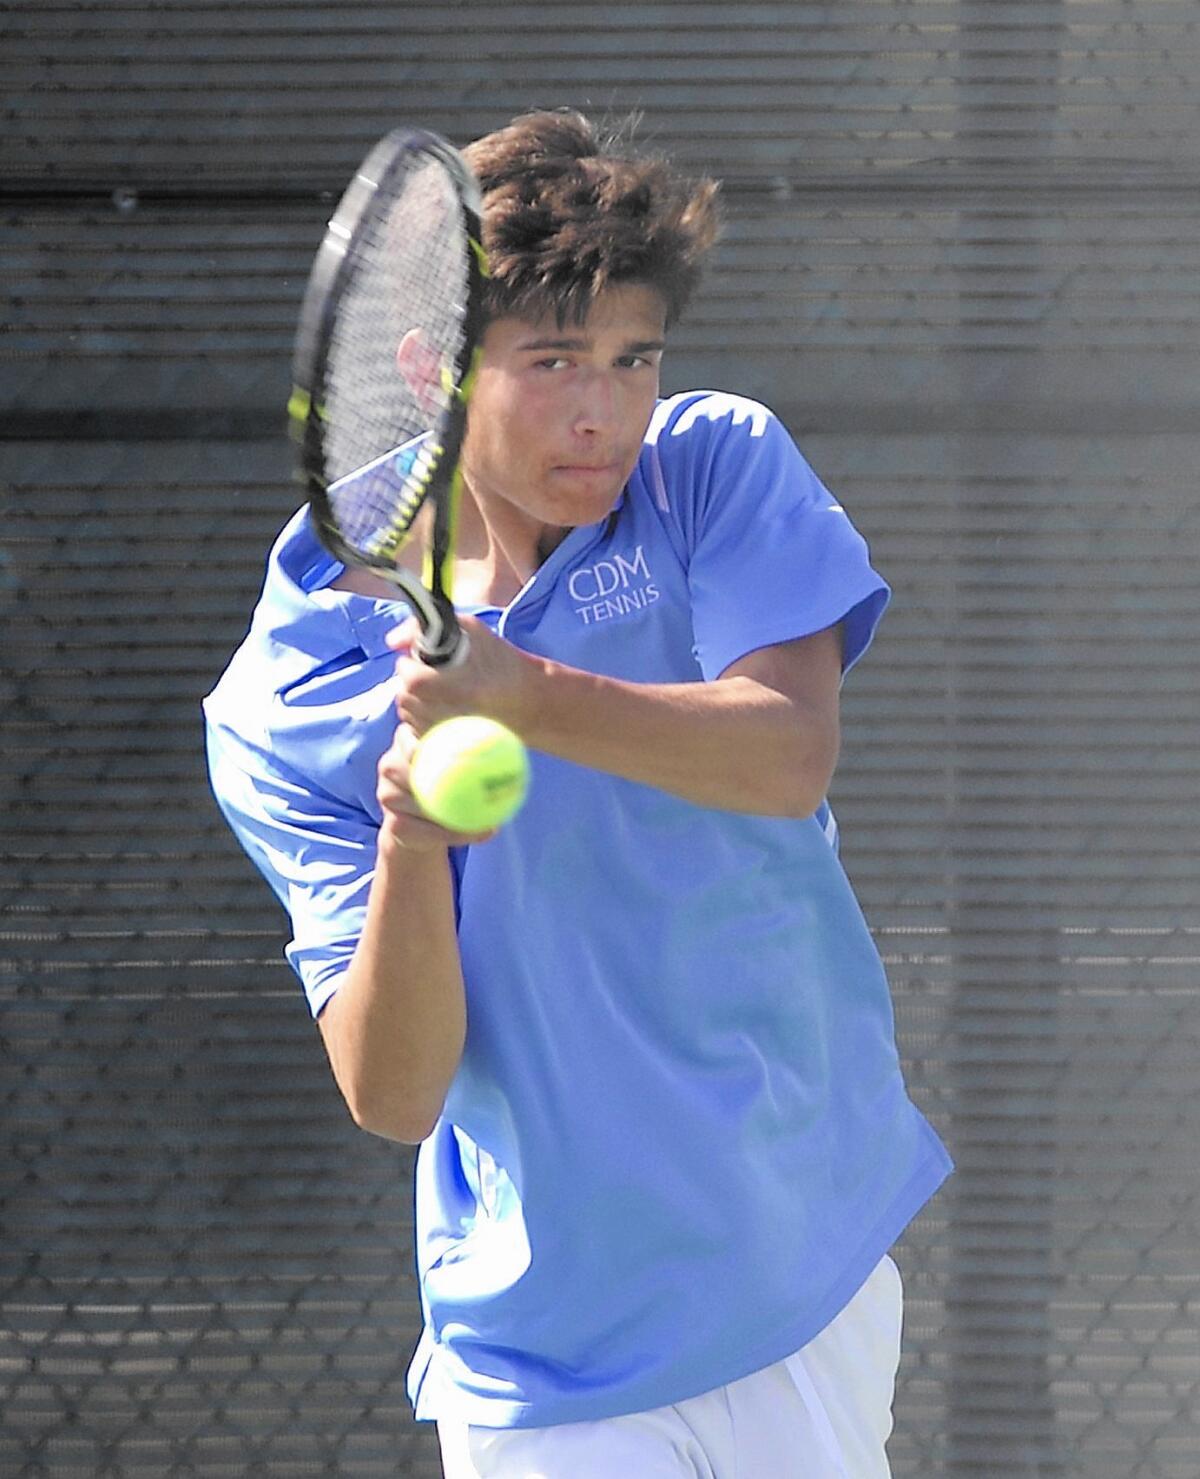 Corona del Mar High senior Bjorn Hoffmann reached the CIF singles division title match of the Ojai Tennis Tournament for the second straight year.